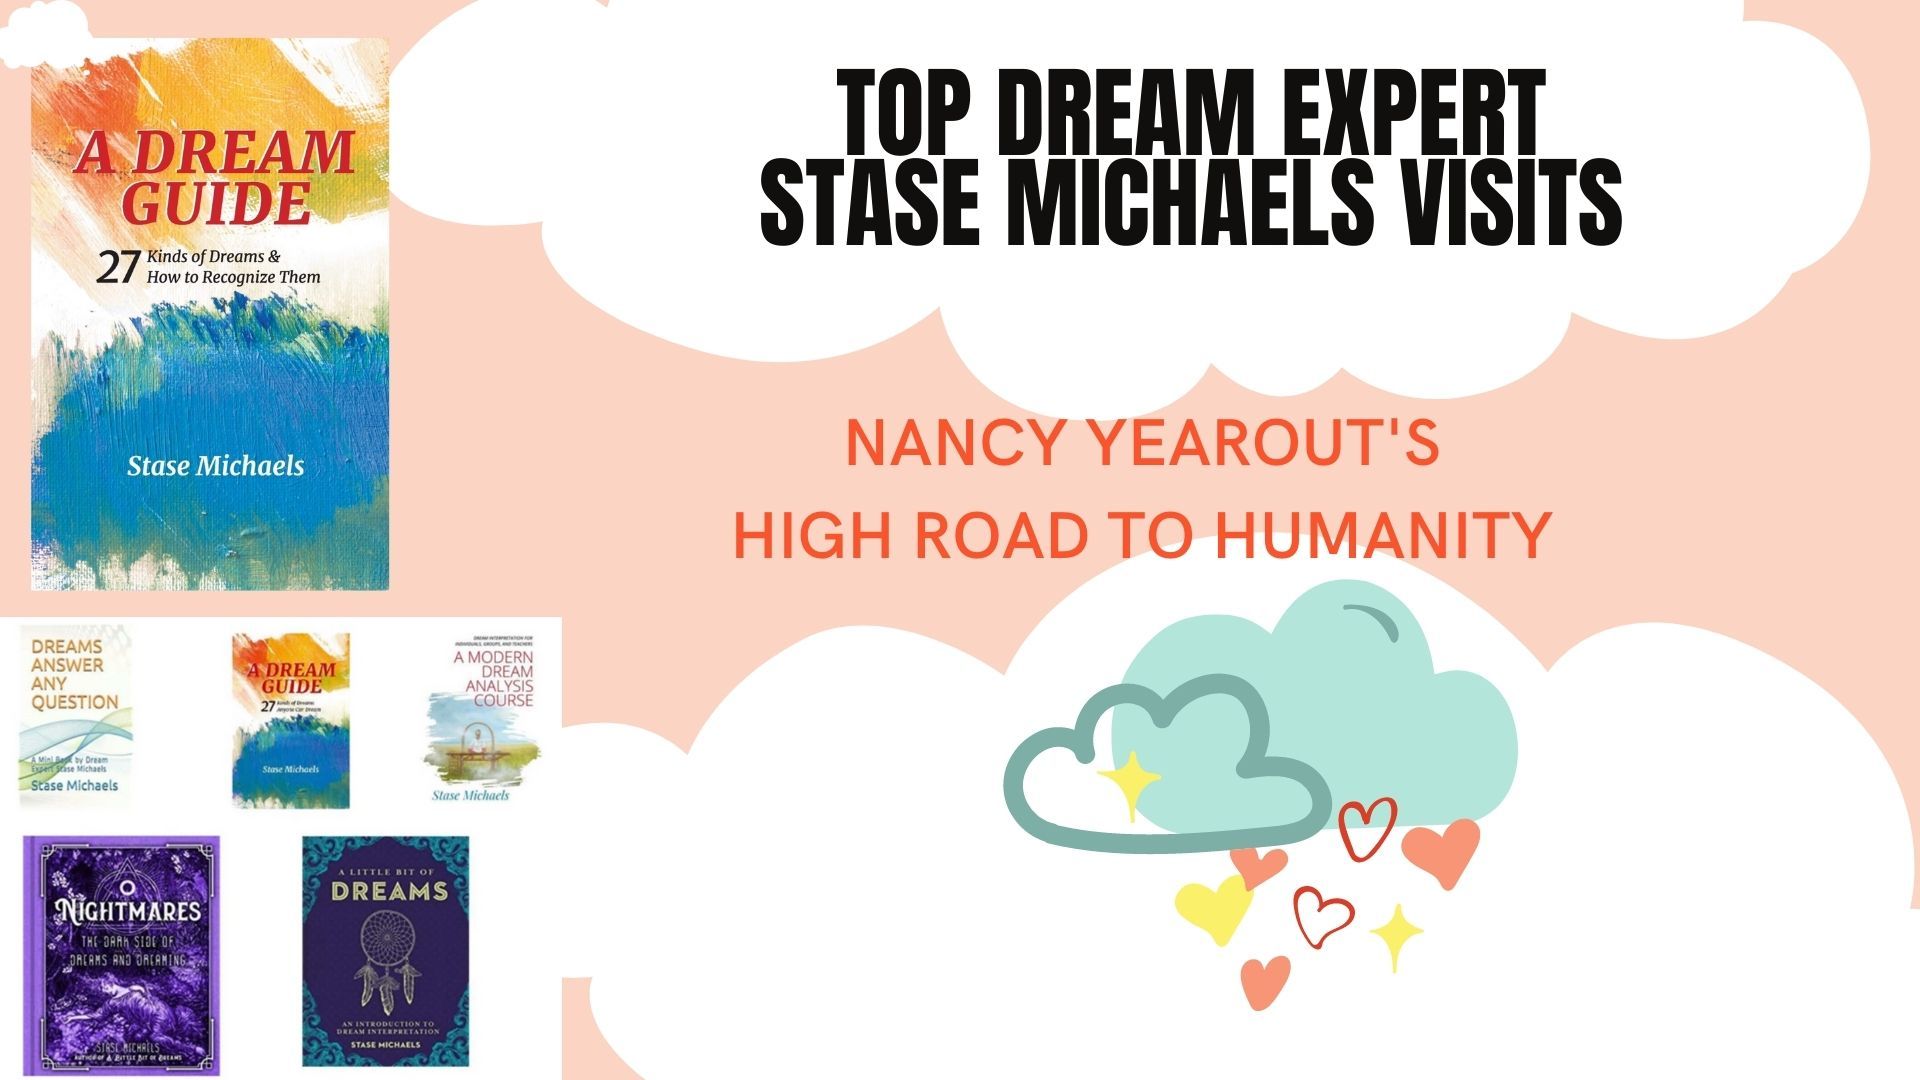 Top Dream Expert Stase Michaels Teaches Us Dream Analysis, Practical Insights & Problem Solving